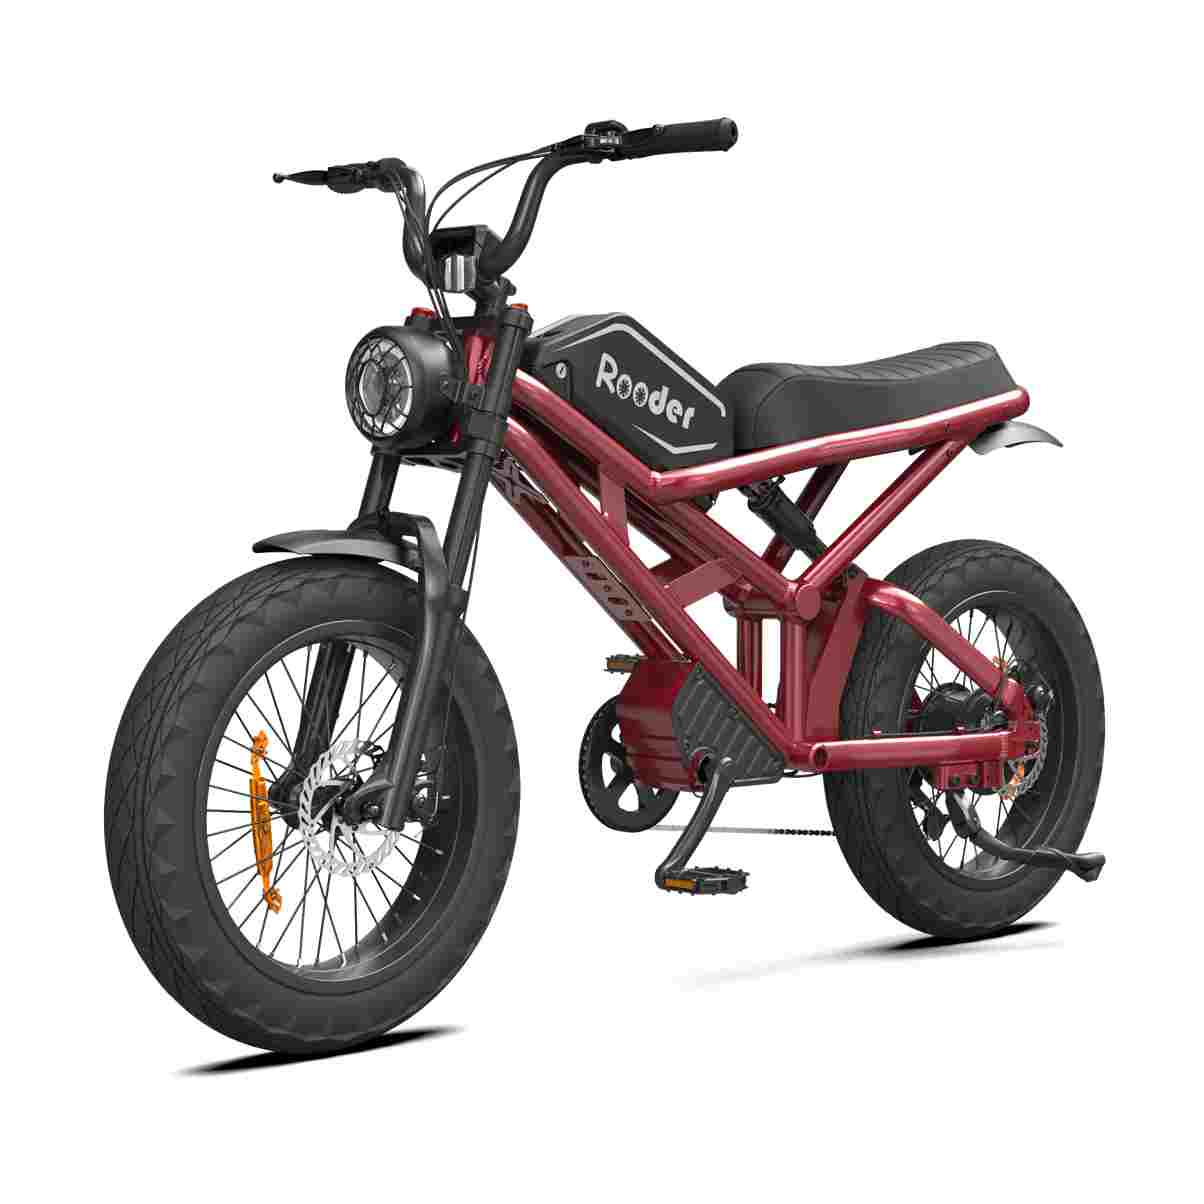 Street Legal Electric Motorcycle wholesale price